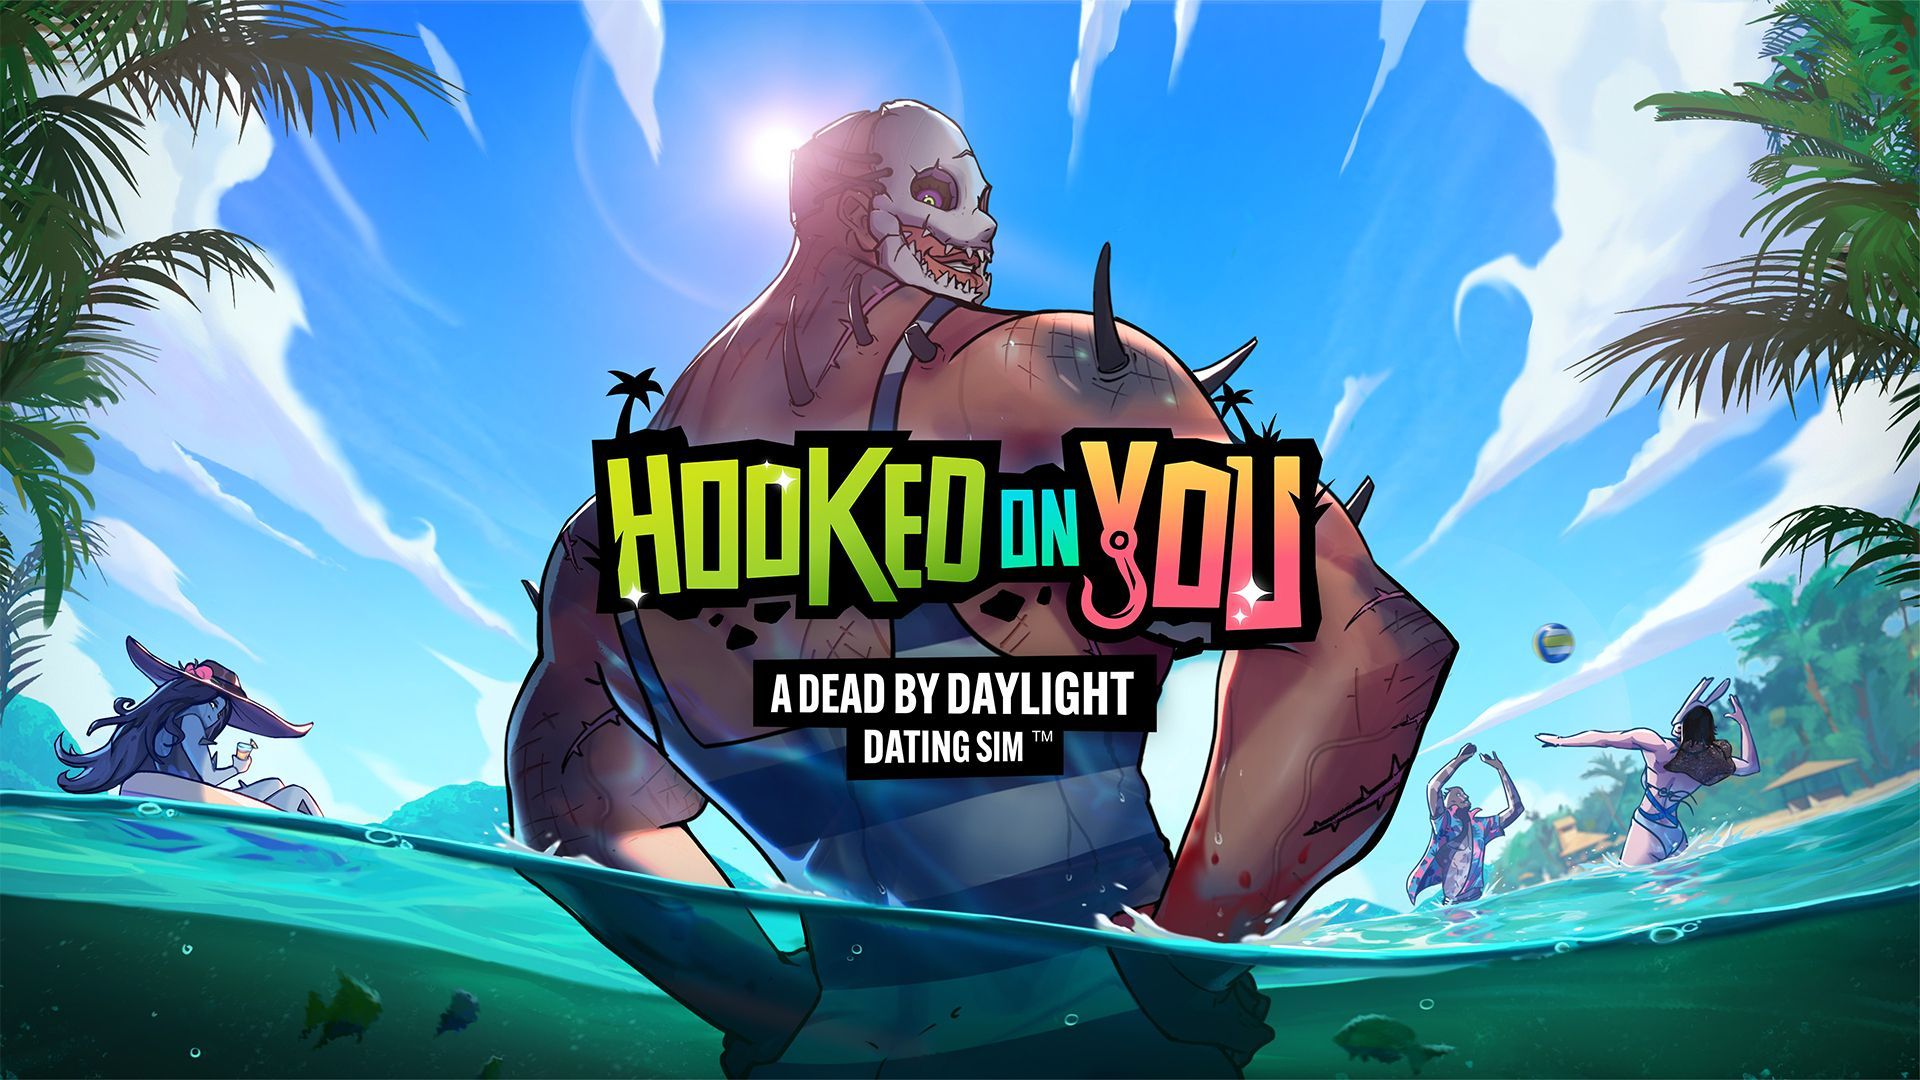 Hooked on You: How to romance each killer